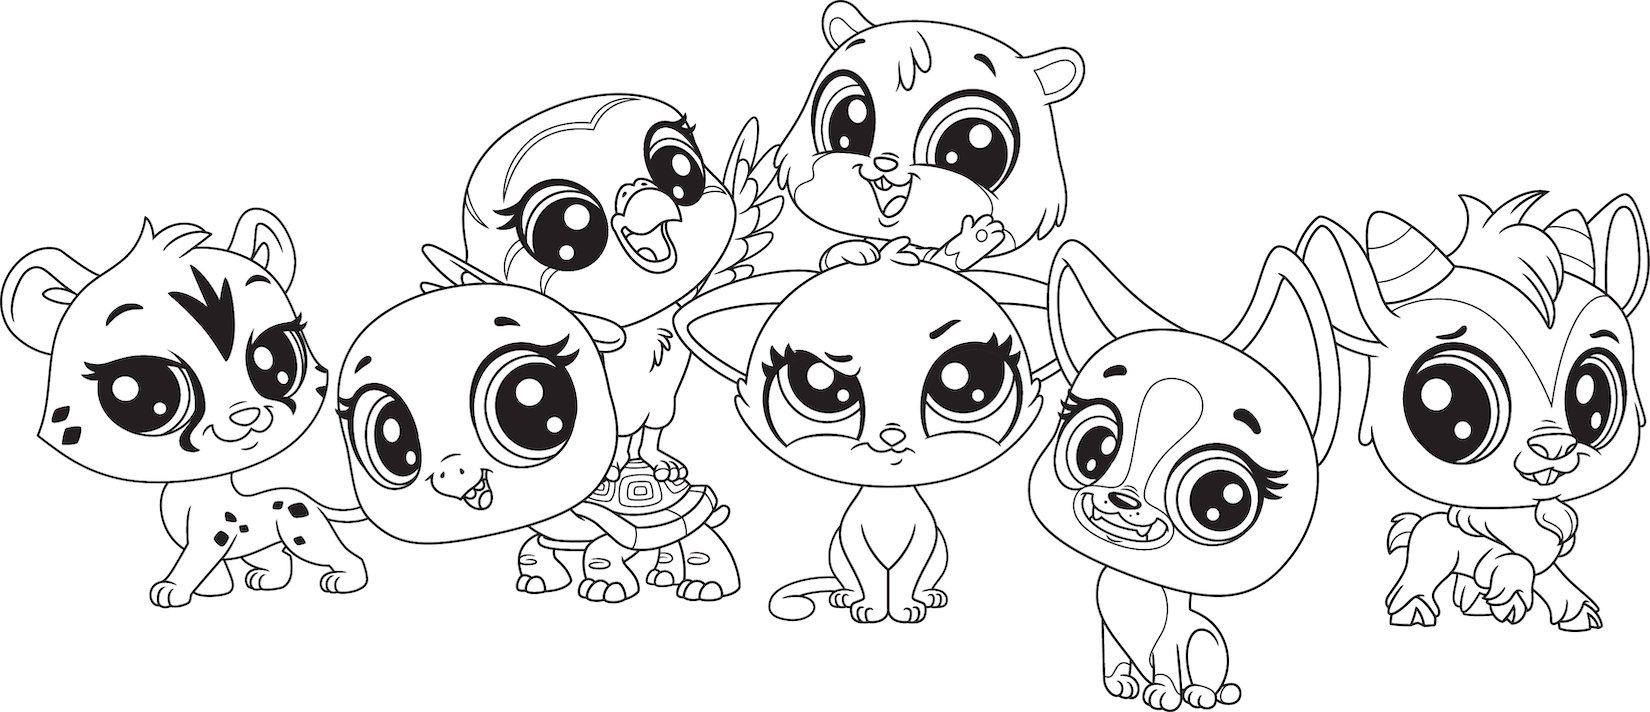 Discovery family on x its time to colorlittlest pet shop style we want to see your artistic take on the lps crew so share your creations with us below now more than